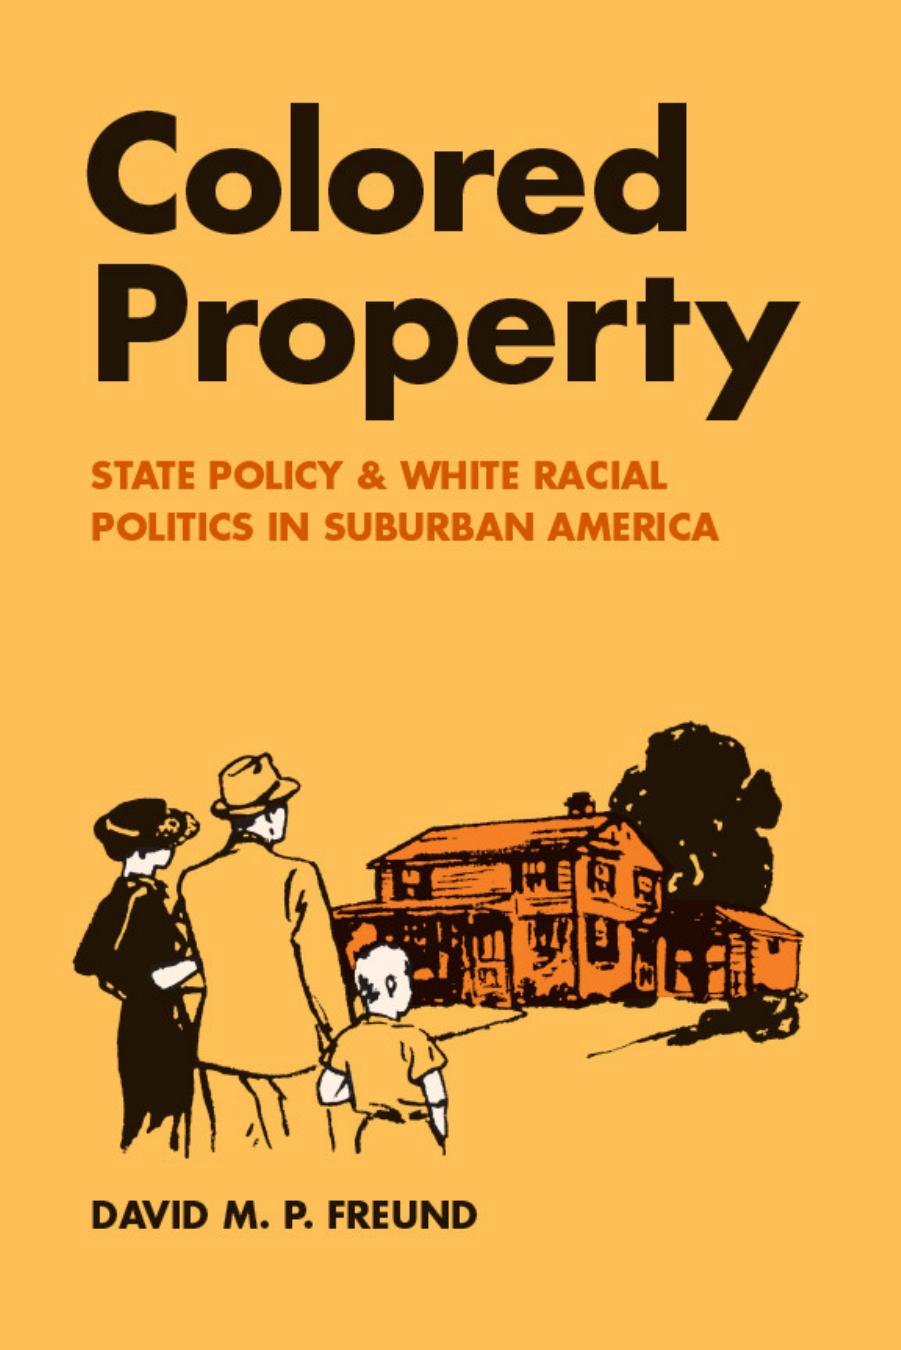 Colored Property: State Policy and White Racial Politics in Suburban America by David M. P. Freund